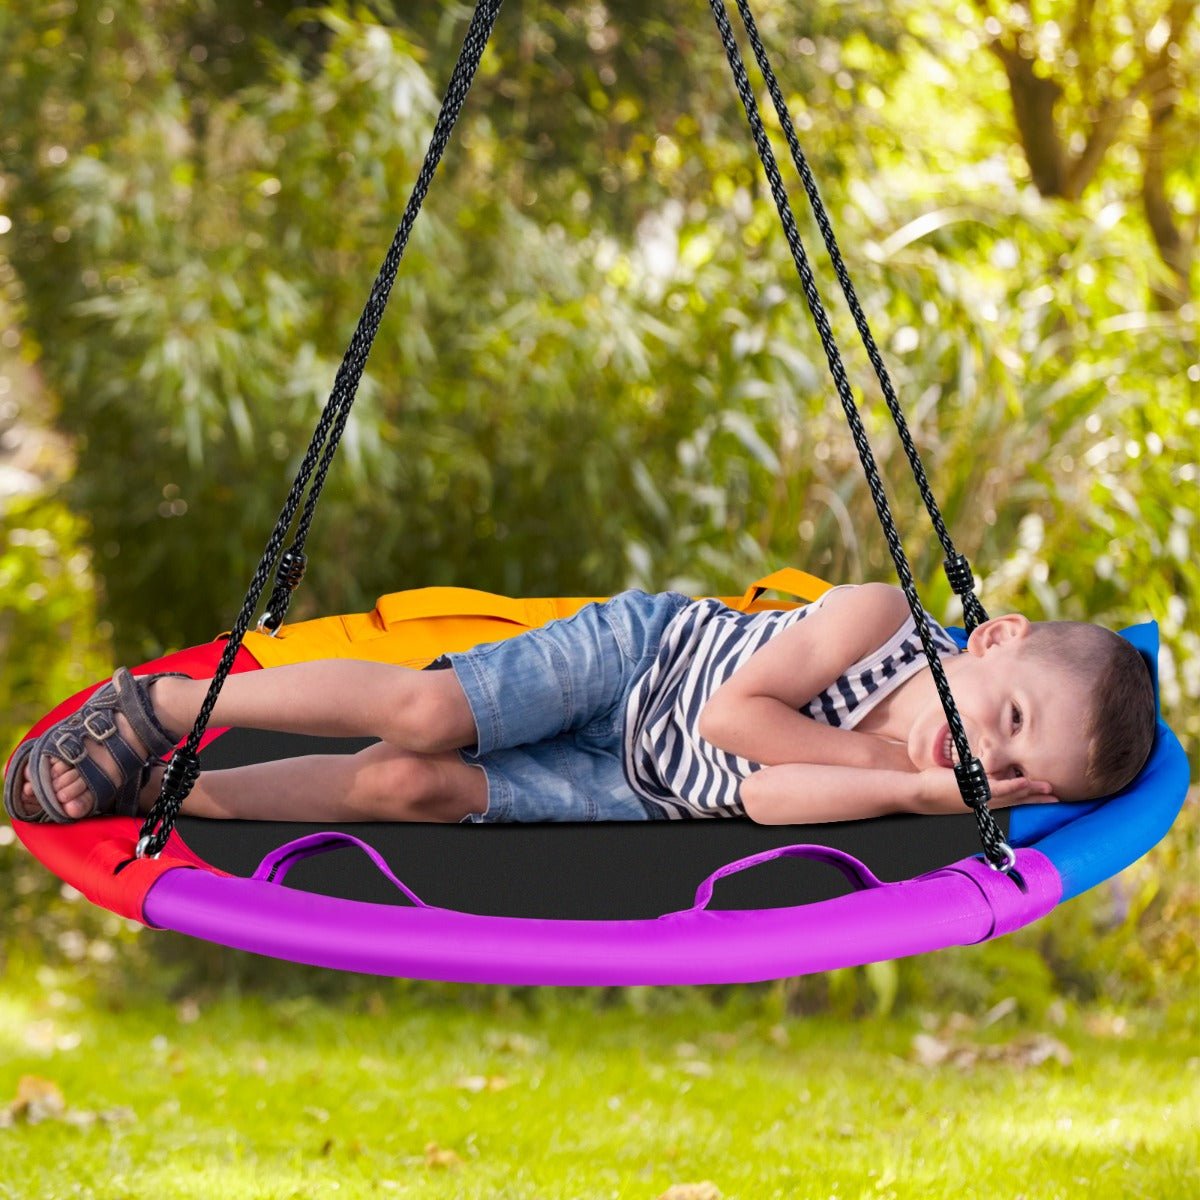 Kids colourful Round Saucer Swing: Outdoor Adventure with Pillow